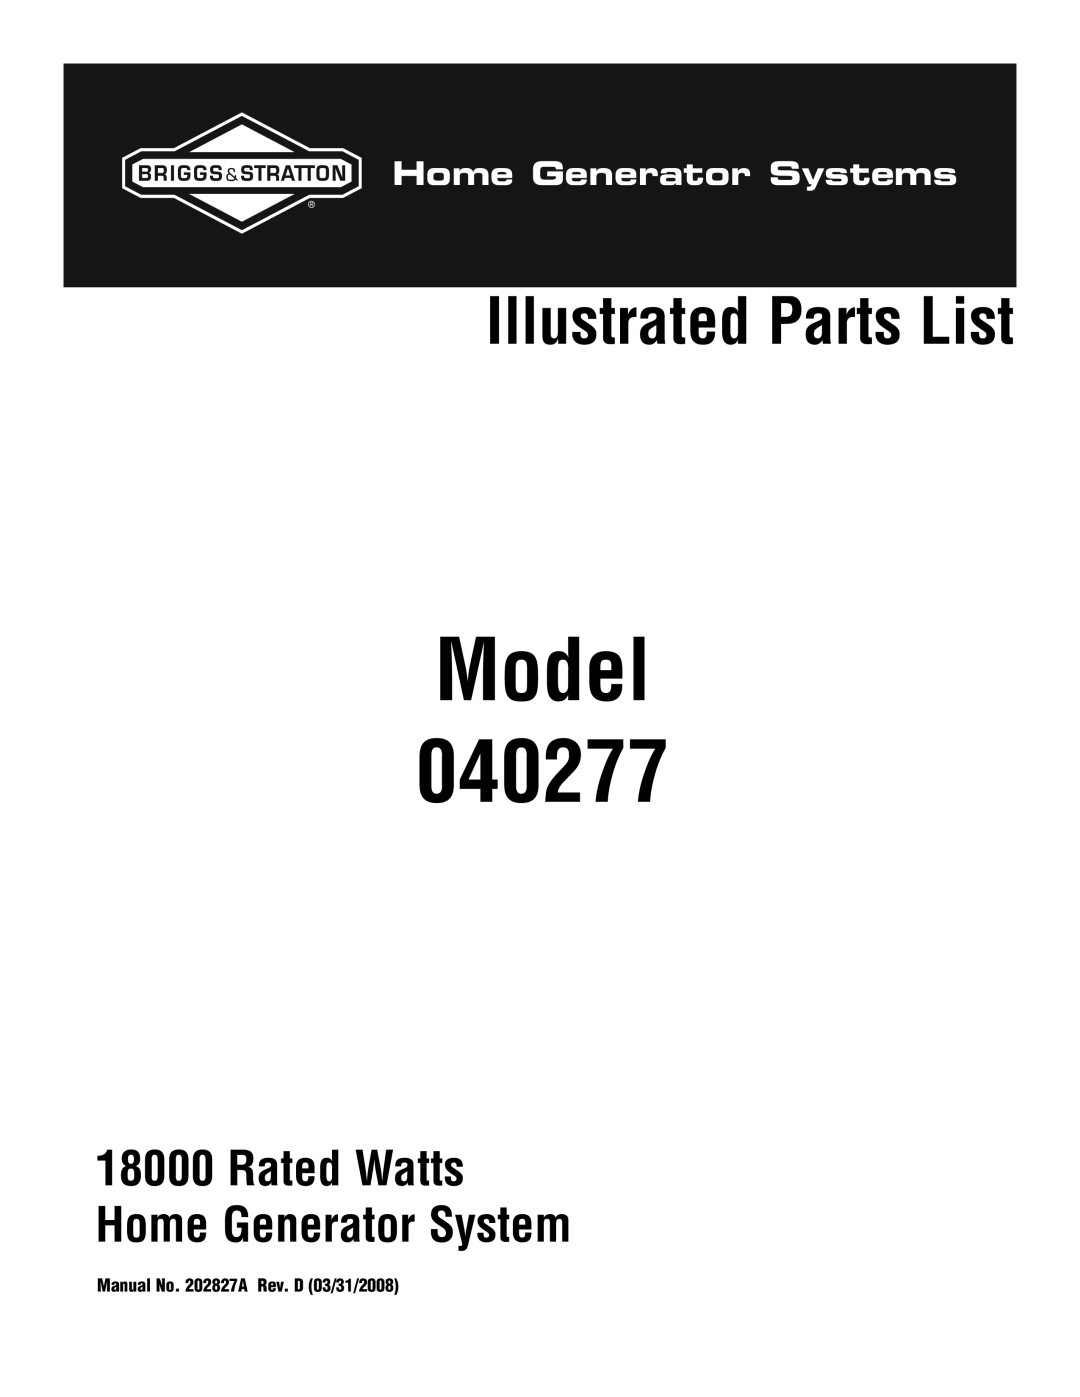 Briggs & Stratton 40277 manual Model, Illustrated Parts List, Rated Watts Home Generator System, Home Generator Systems 